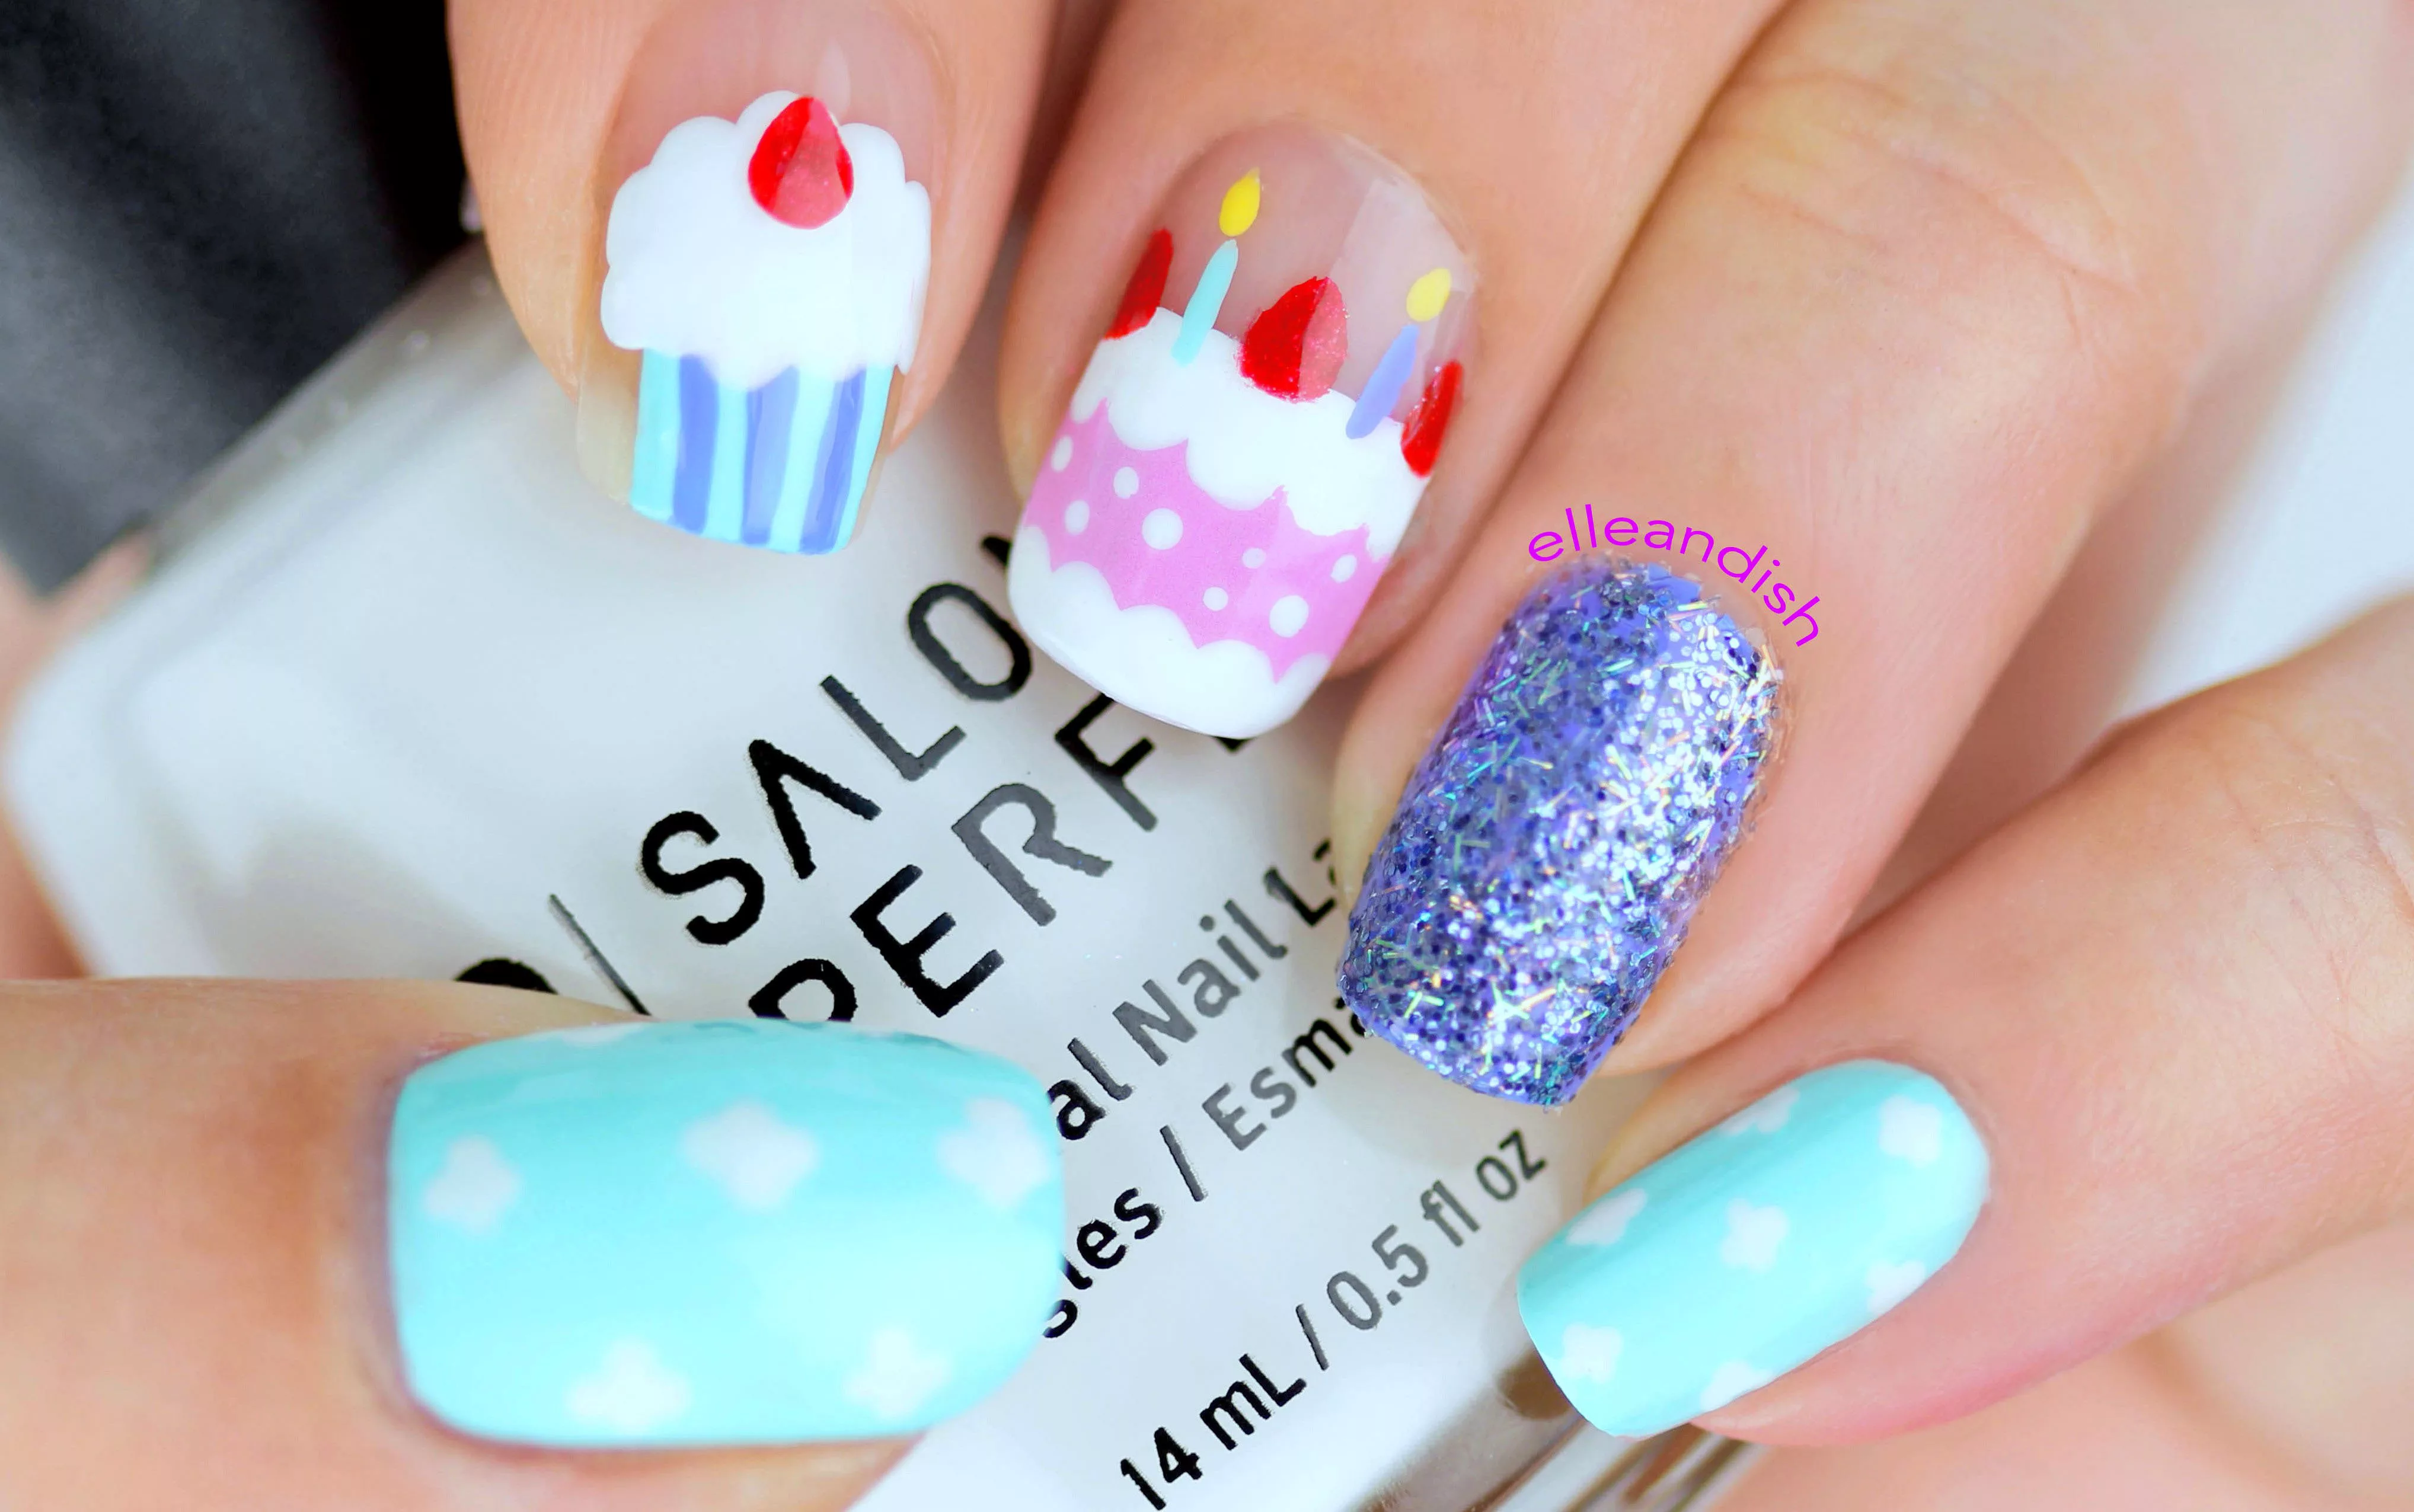 3. "Birthday and Valentine's Day Inspired Gel Nails" - wide 8